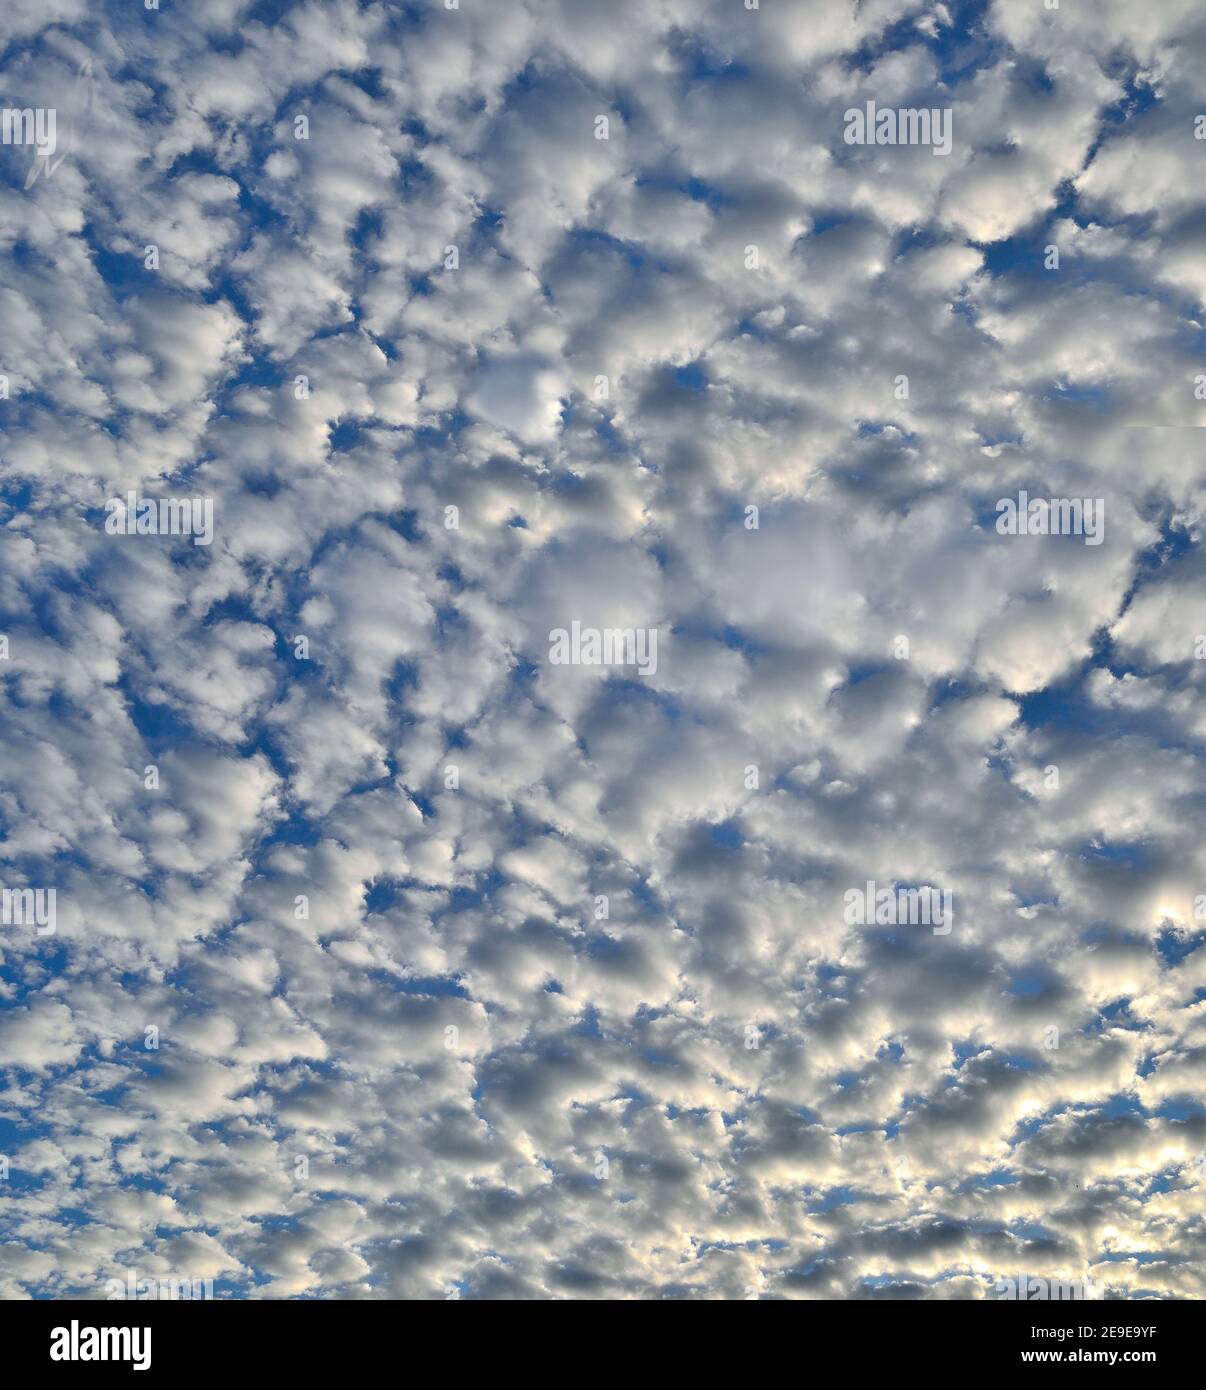 Natural background - white fluffy stratocumulus clouds on blue sky. Texture of unusual cloudy sky in sunny day. Clouds with sunlight illuminated. Mete Stock Photo